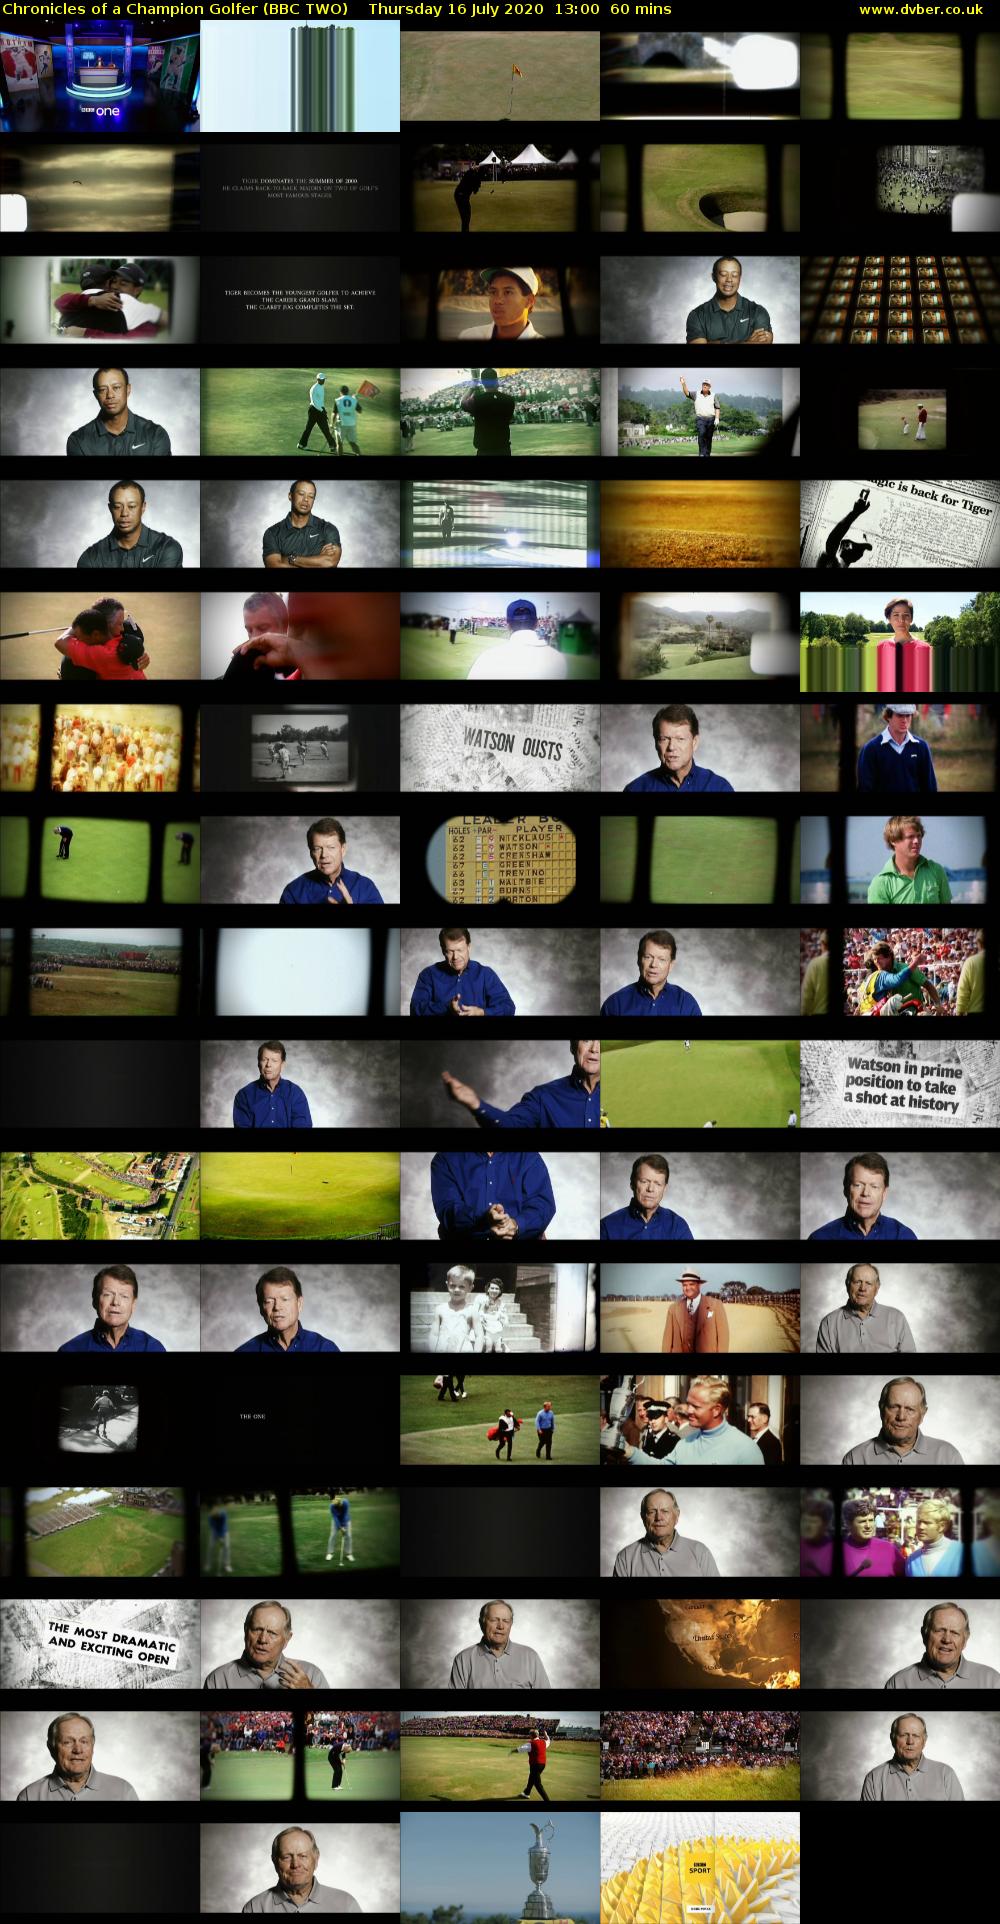 Chronicles of a Champion Golfer (BBC TWO) Thursday 16 July 2020 13:00 - 14:00